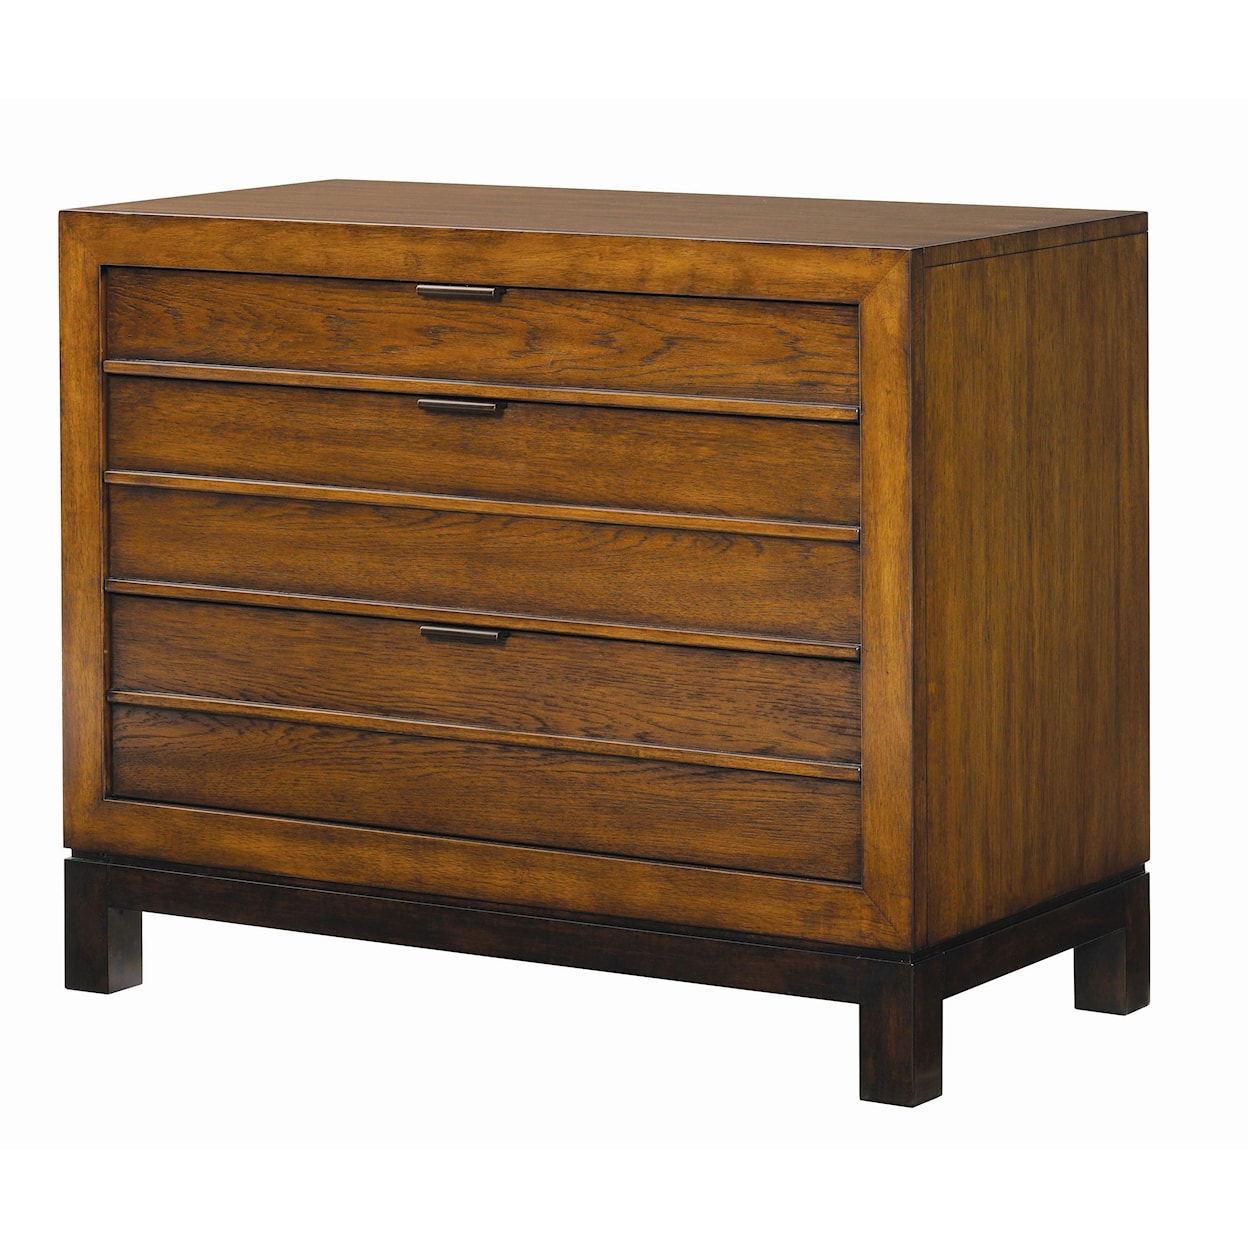 Tommy Bahama Home Ocean Club Coral Nightstand